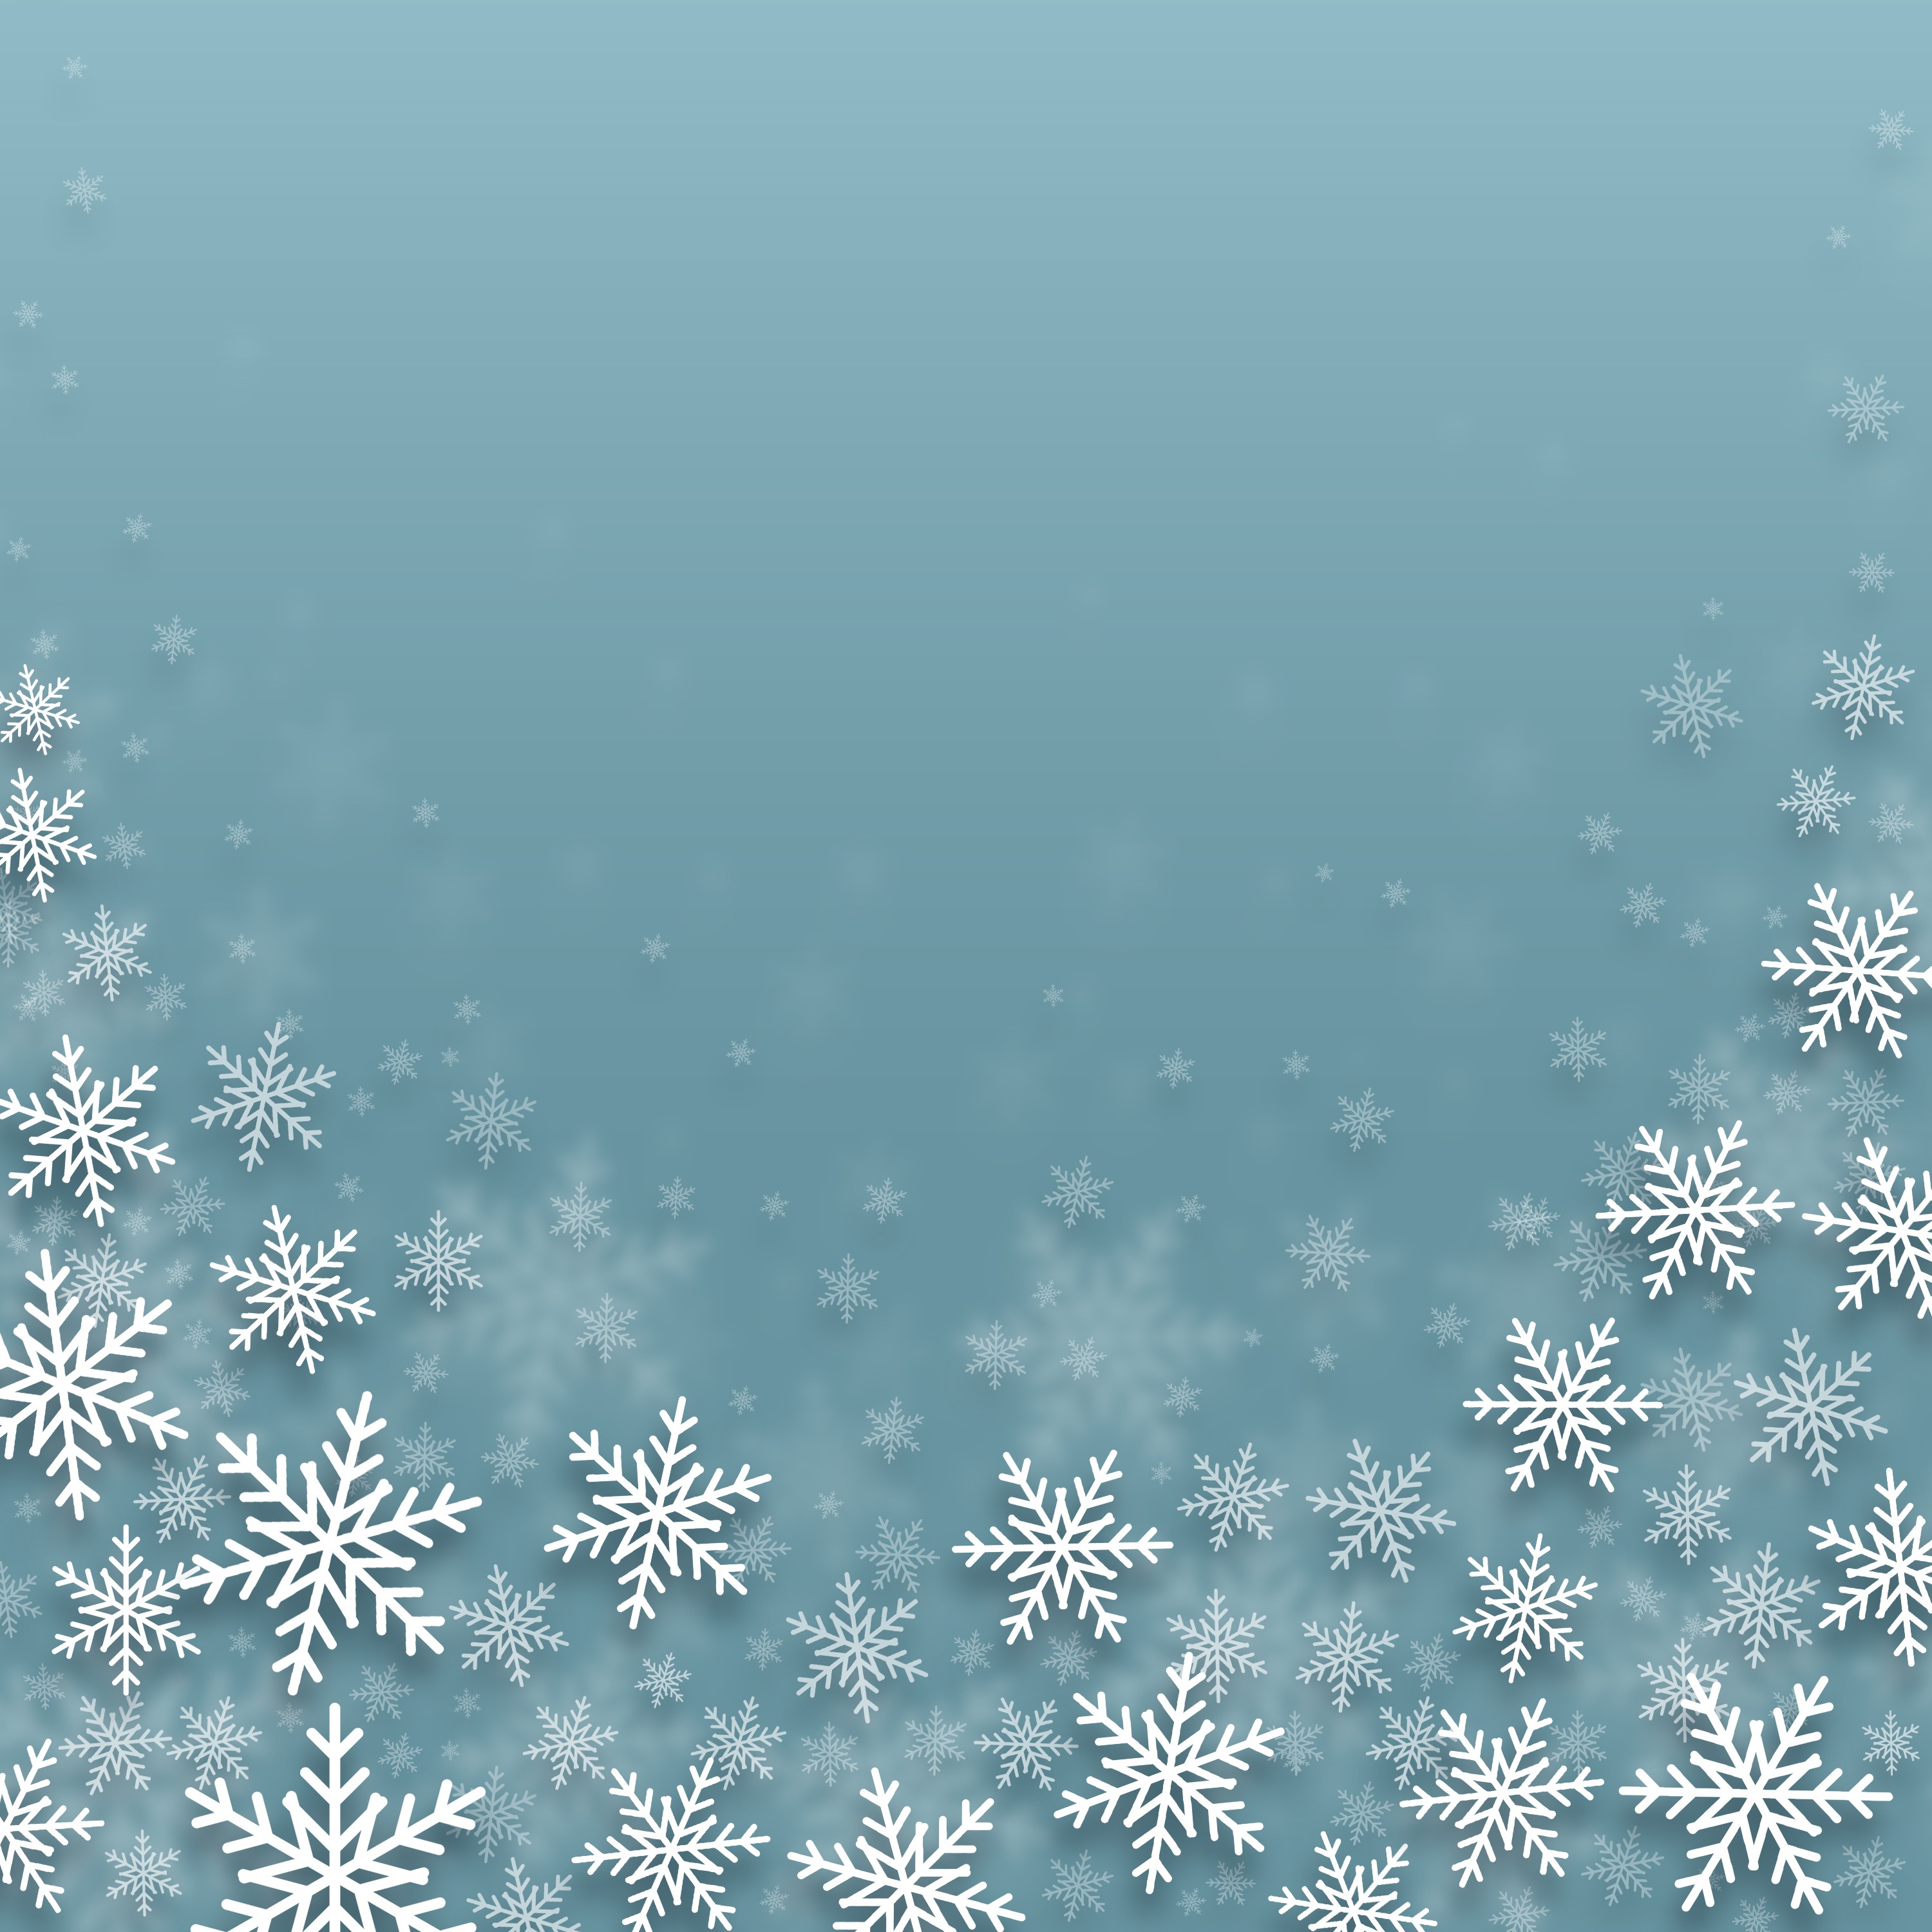 Artistic Snowflake Picture - Image Abyss